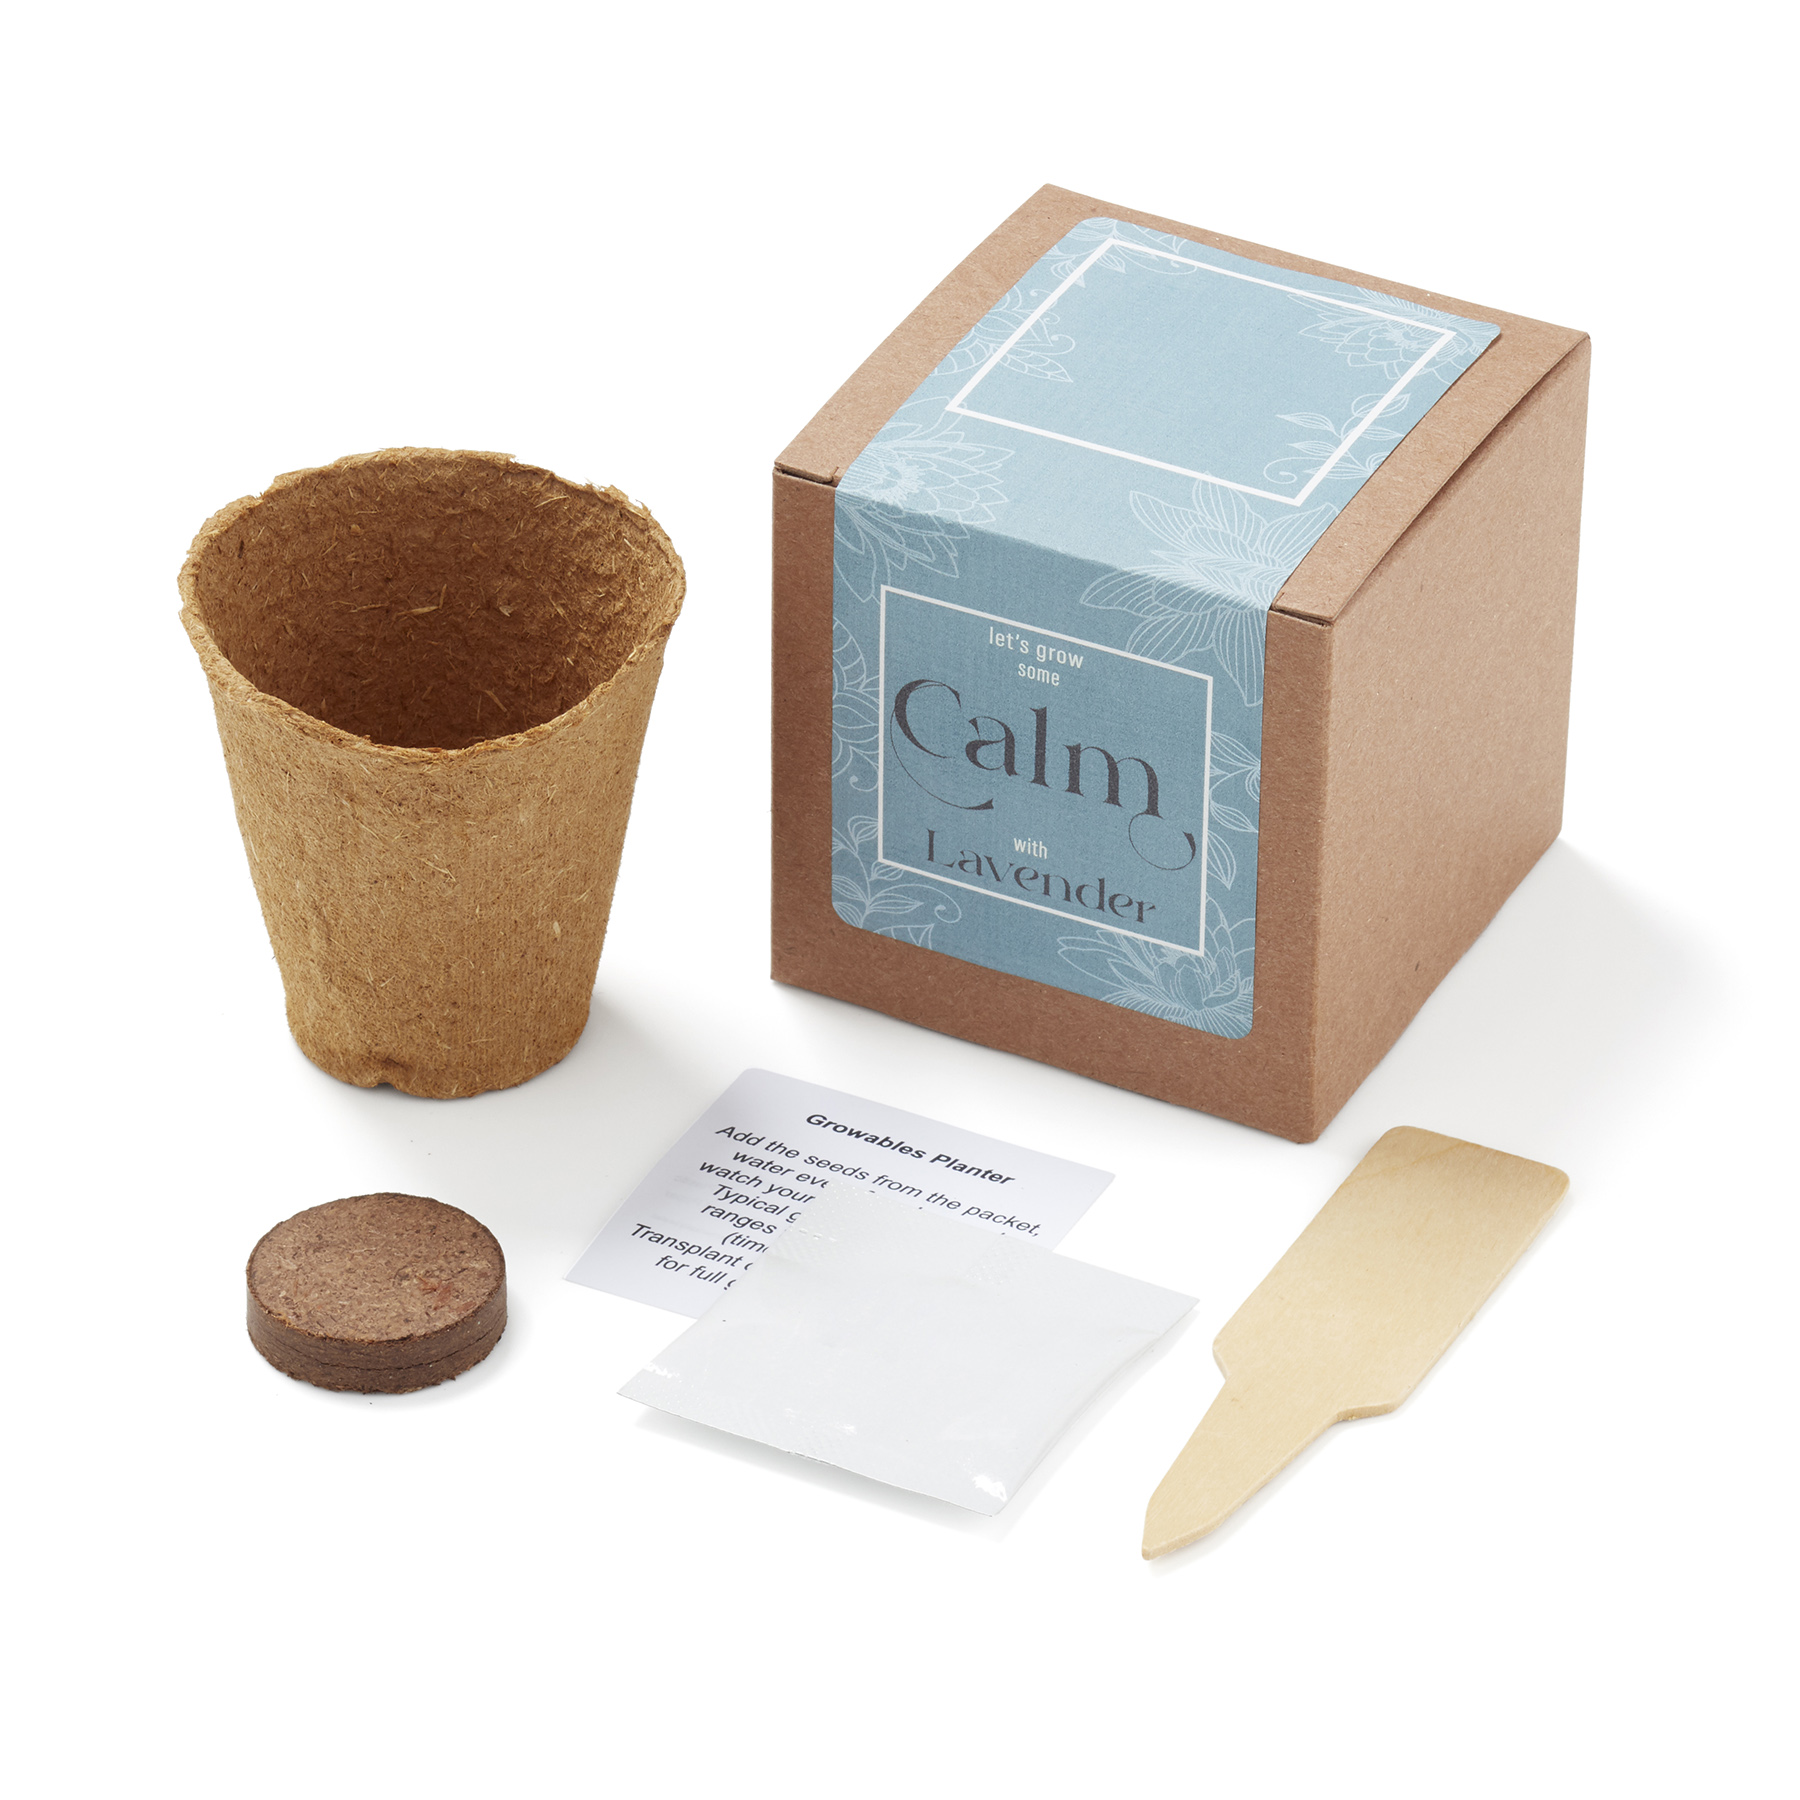 Grow Some Calm Planter in Gift Box